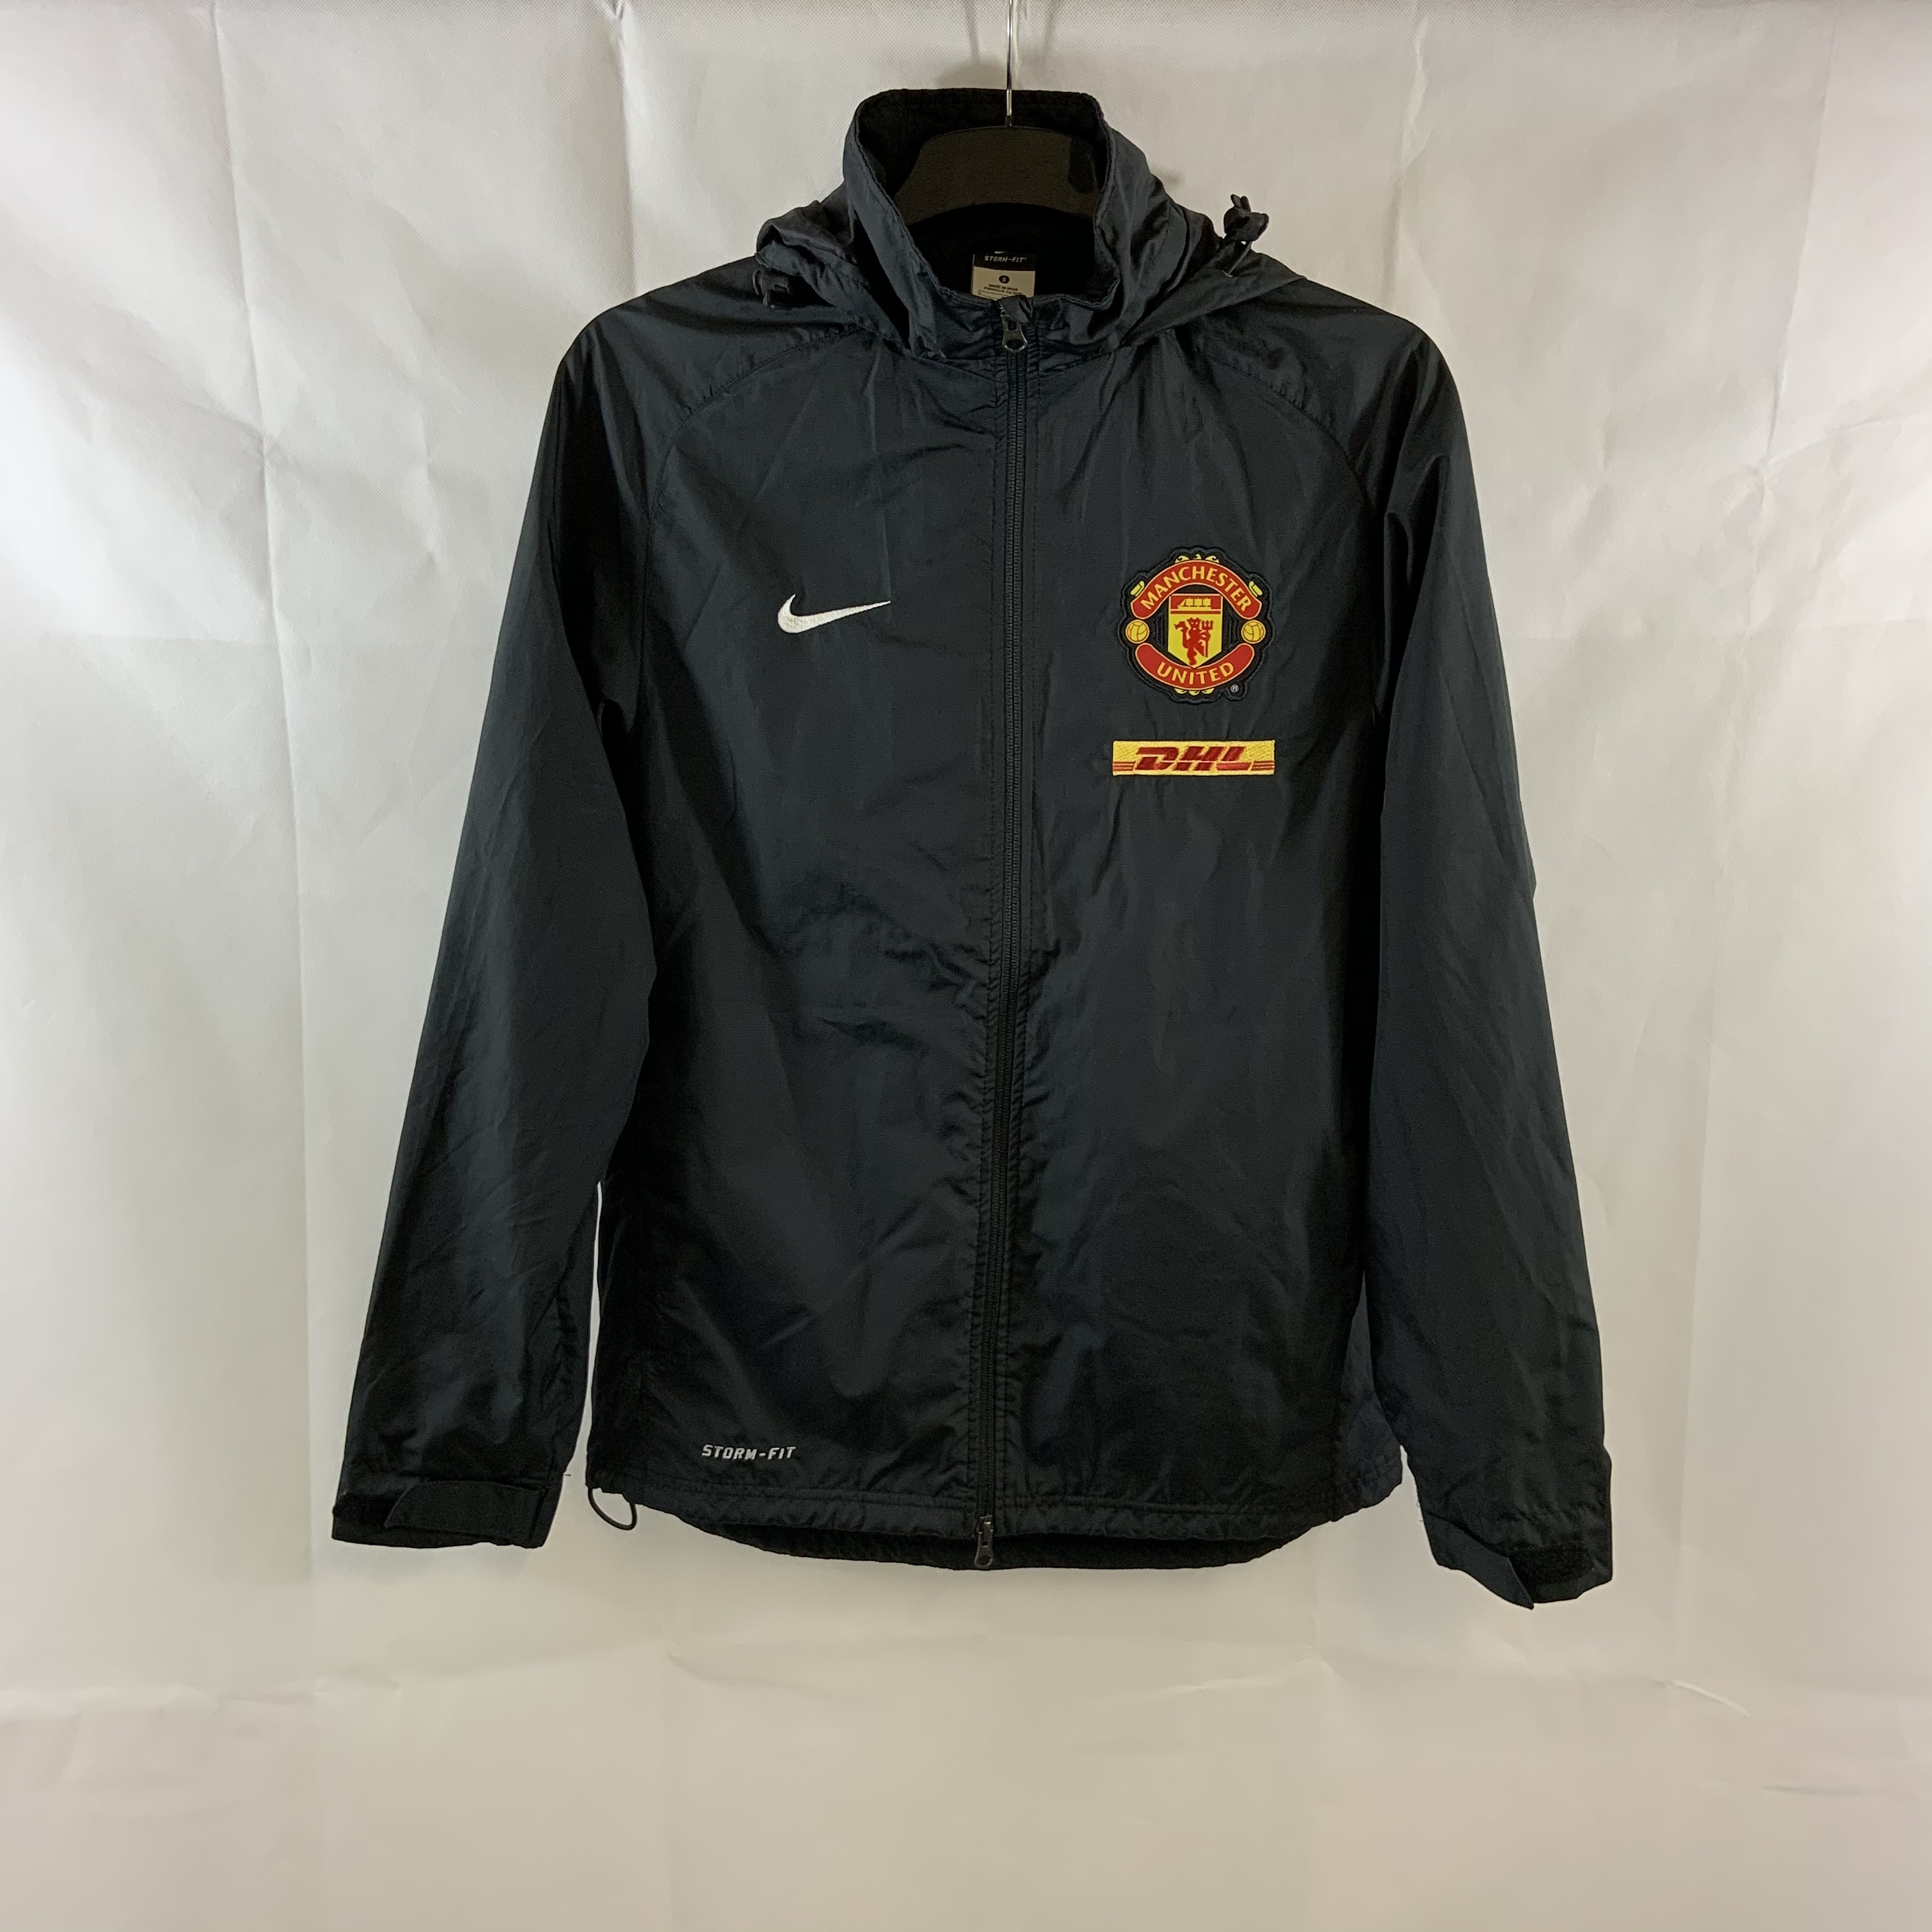 Manchester United Player Issue Football Jacket 2012/13 Adults Small